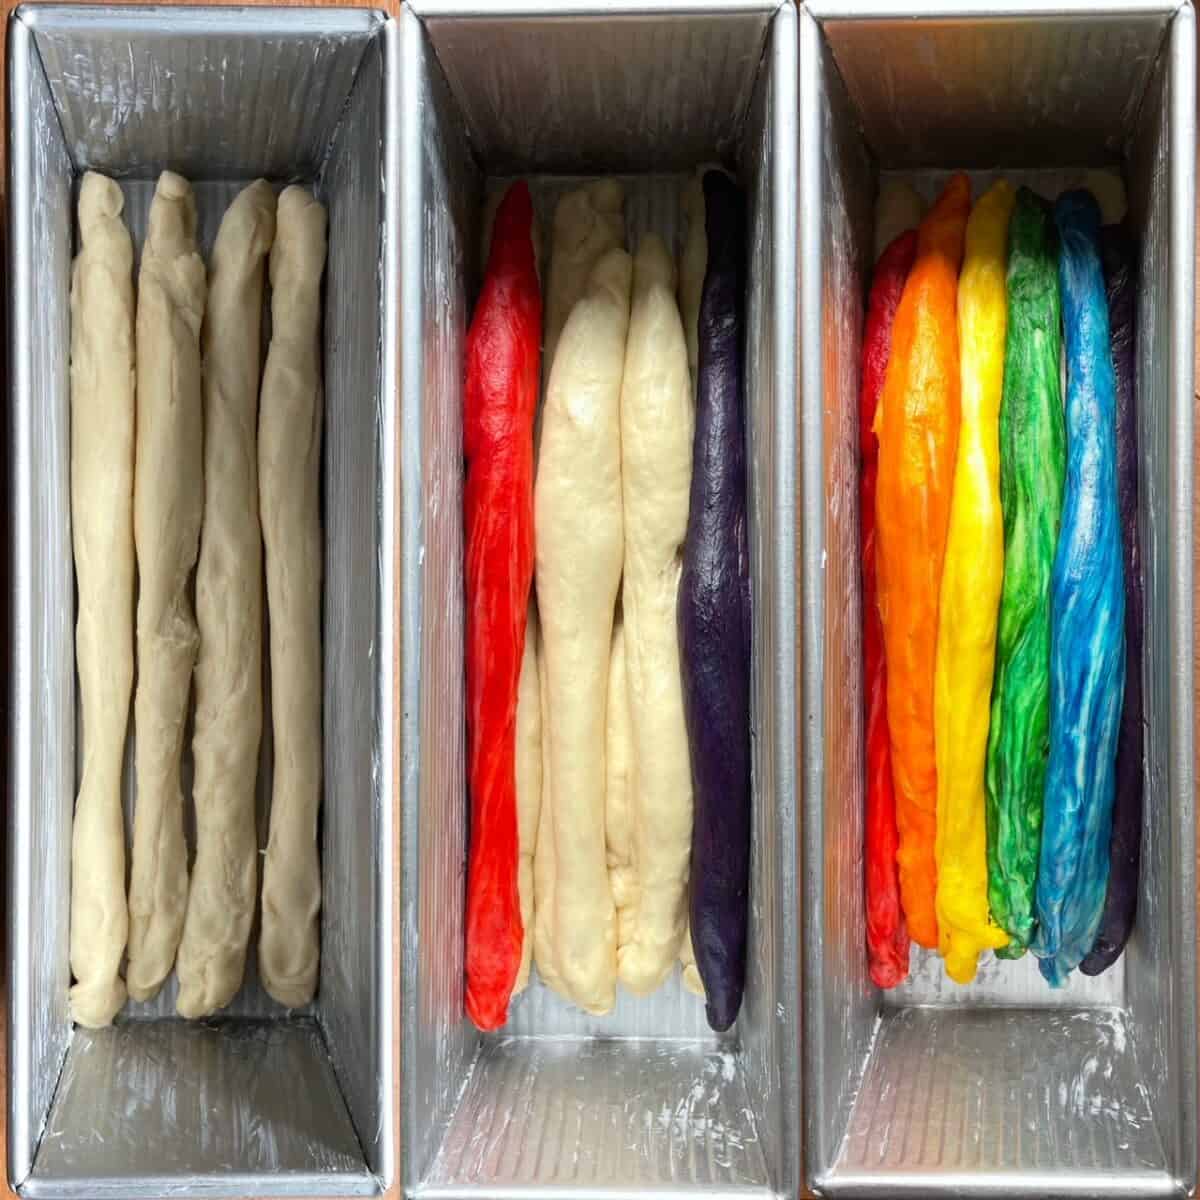 three panels showing how the rainbow bread dough is placed in the pan.